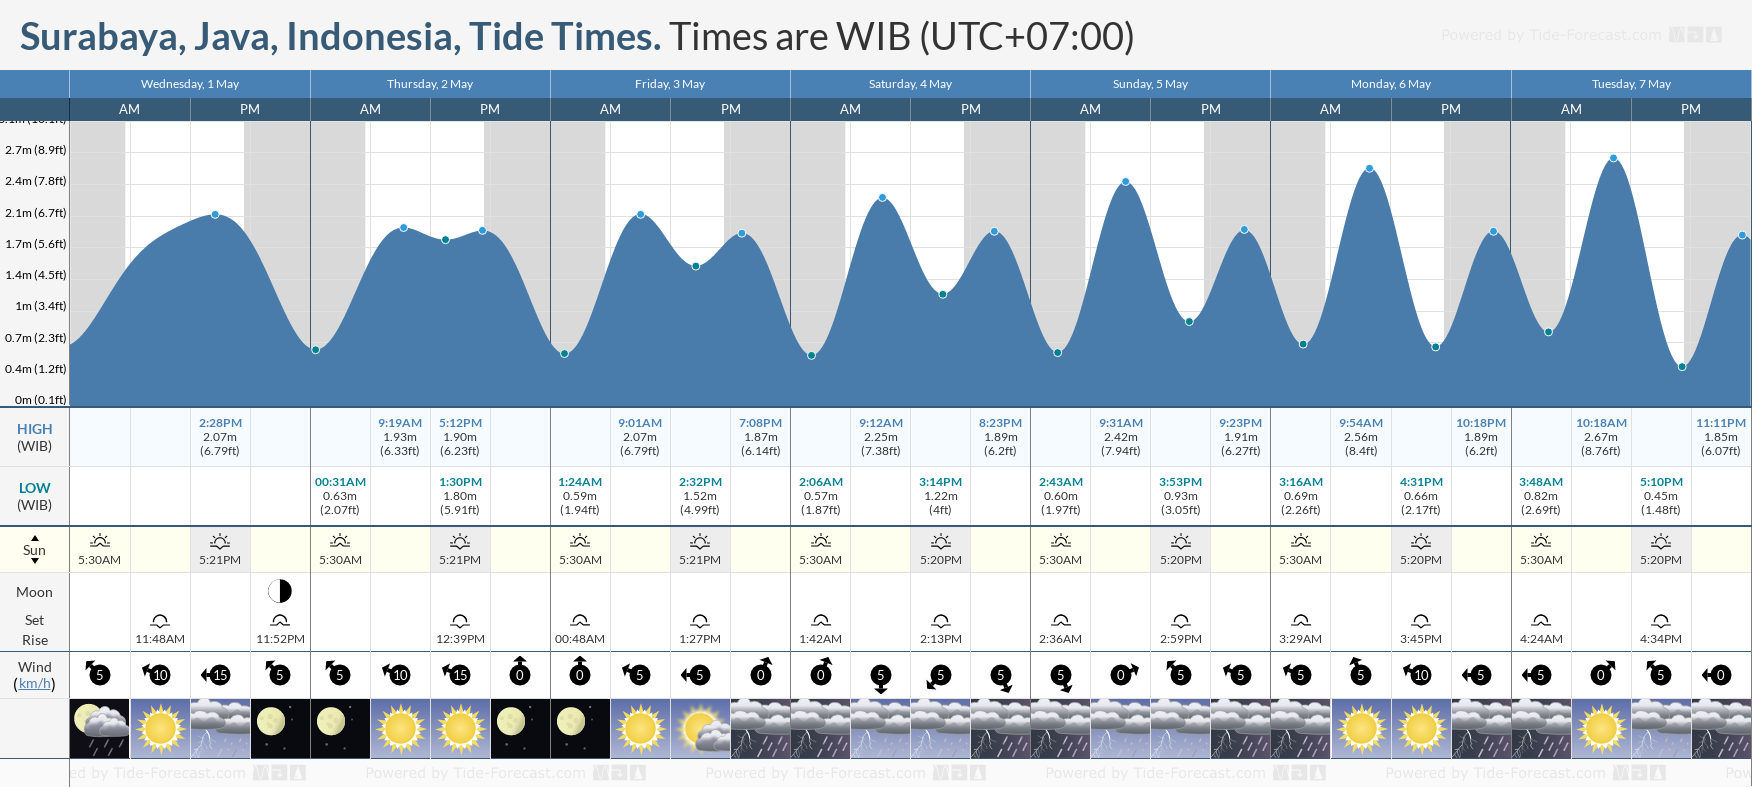 Surabaya, Java, Indonesia Tide Chart including high and low tide times for the next 7 days